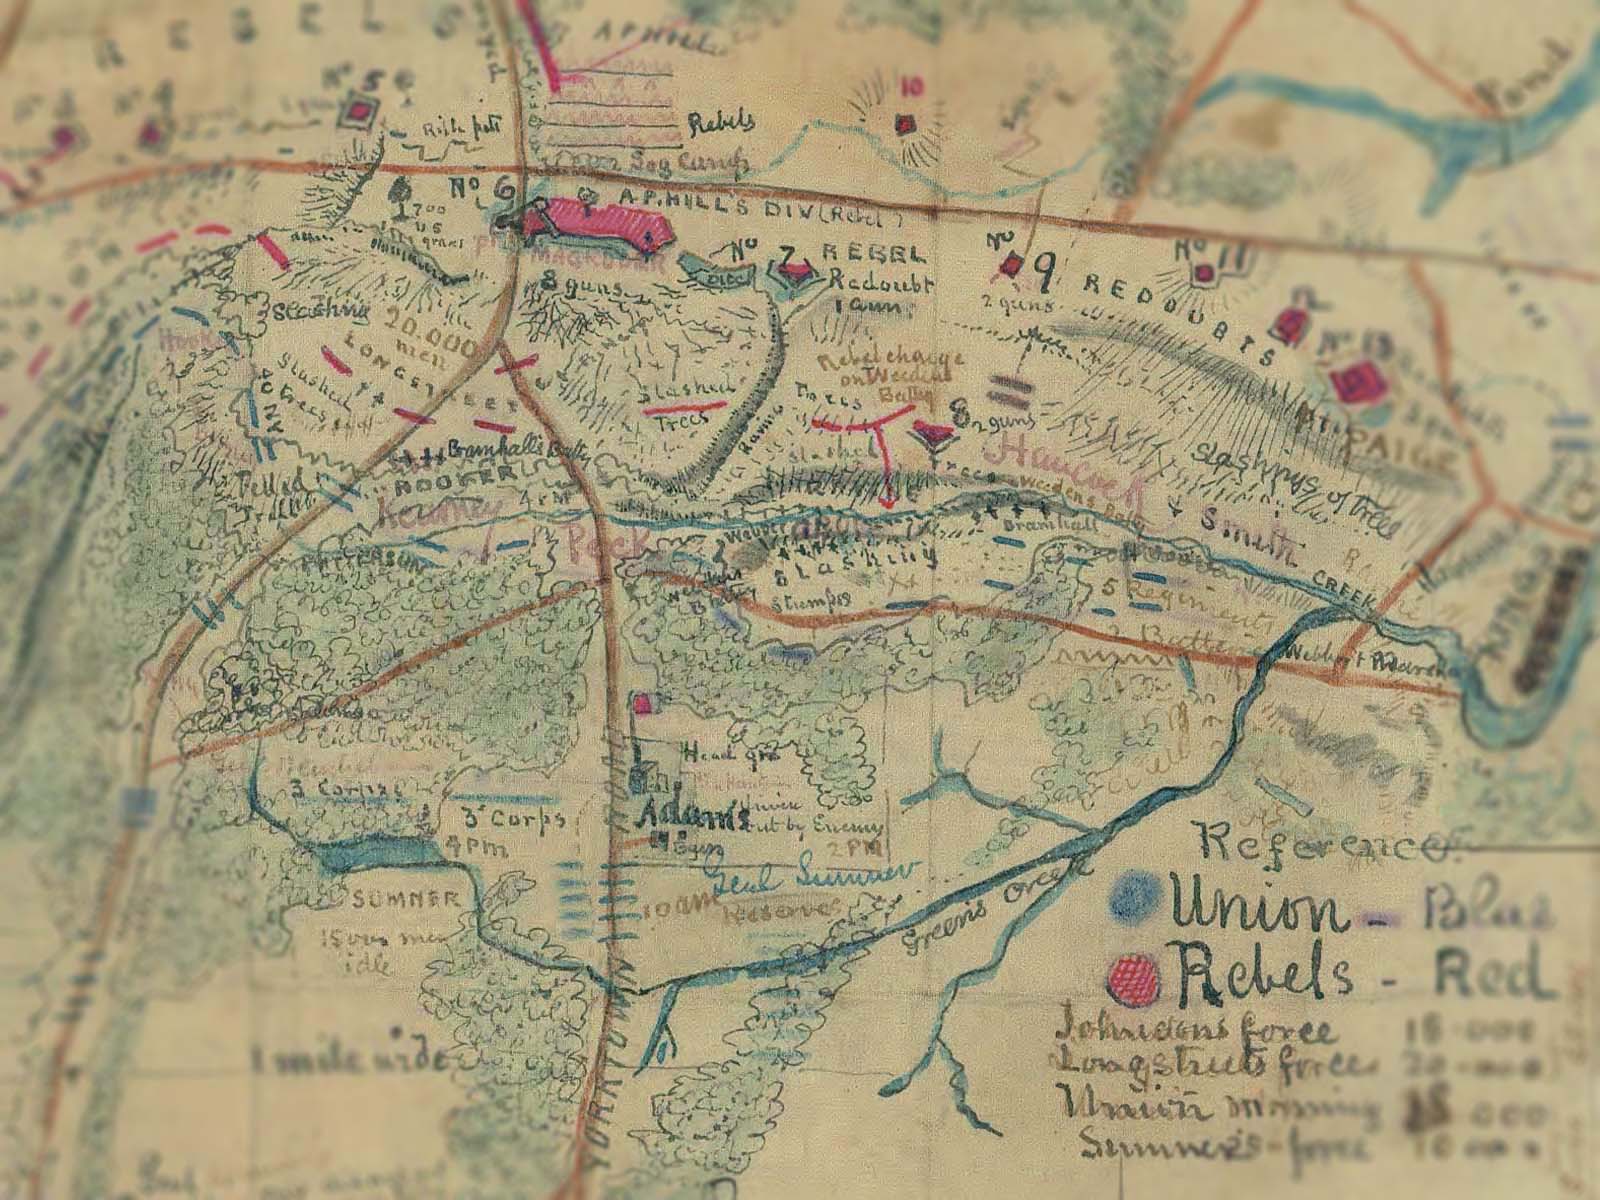 Hand-drawn map of Williamsburg battle shows Red lines for “Rebel” troop and blue lines for Union.